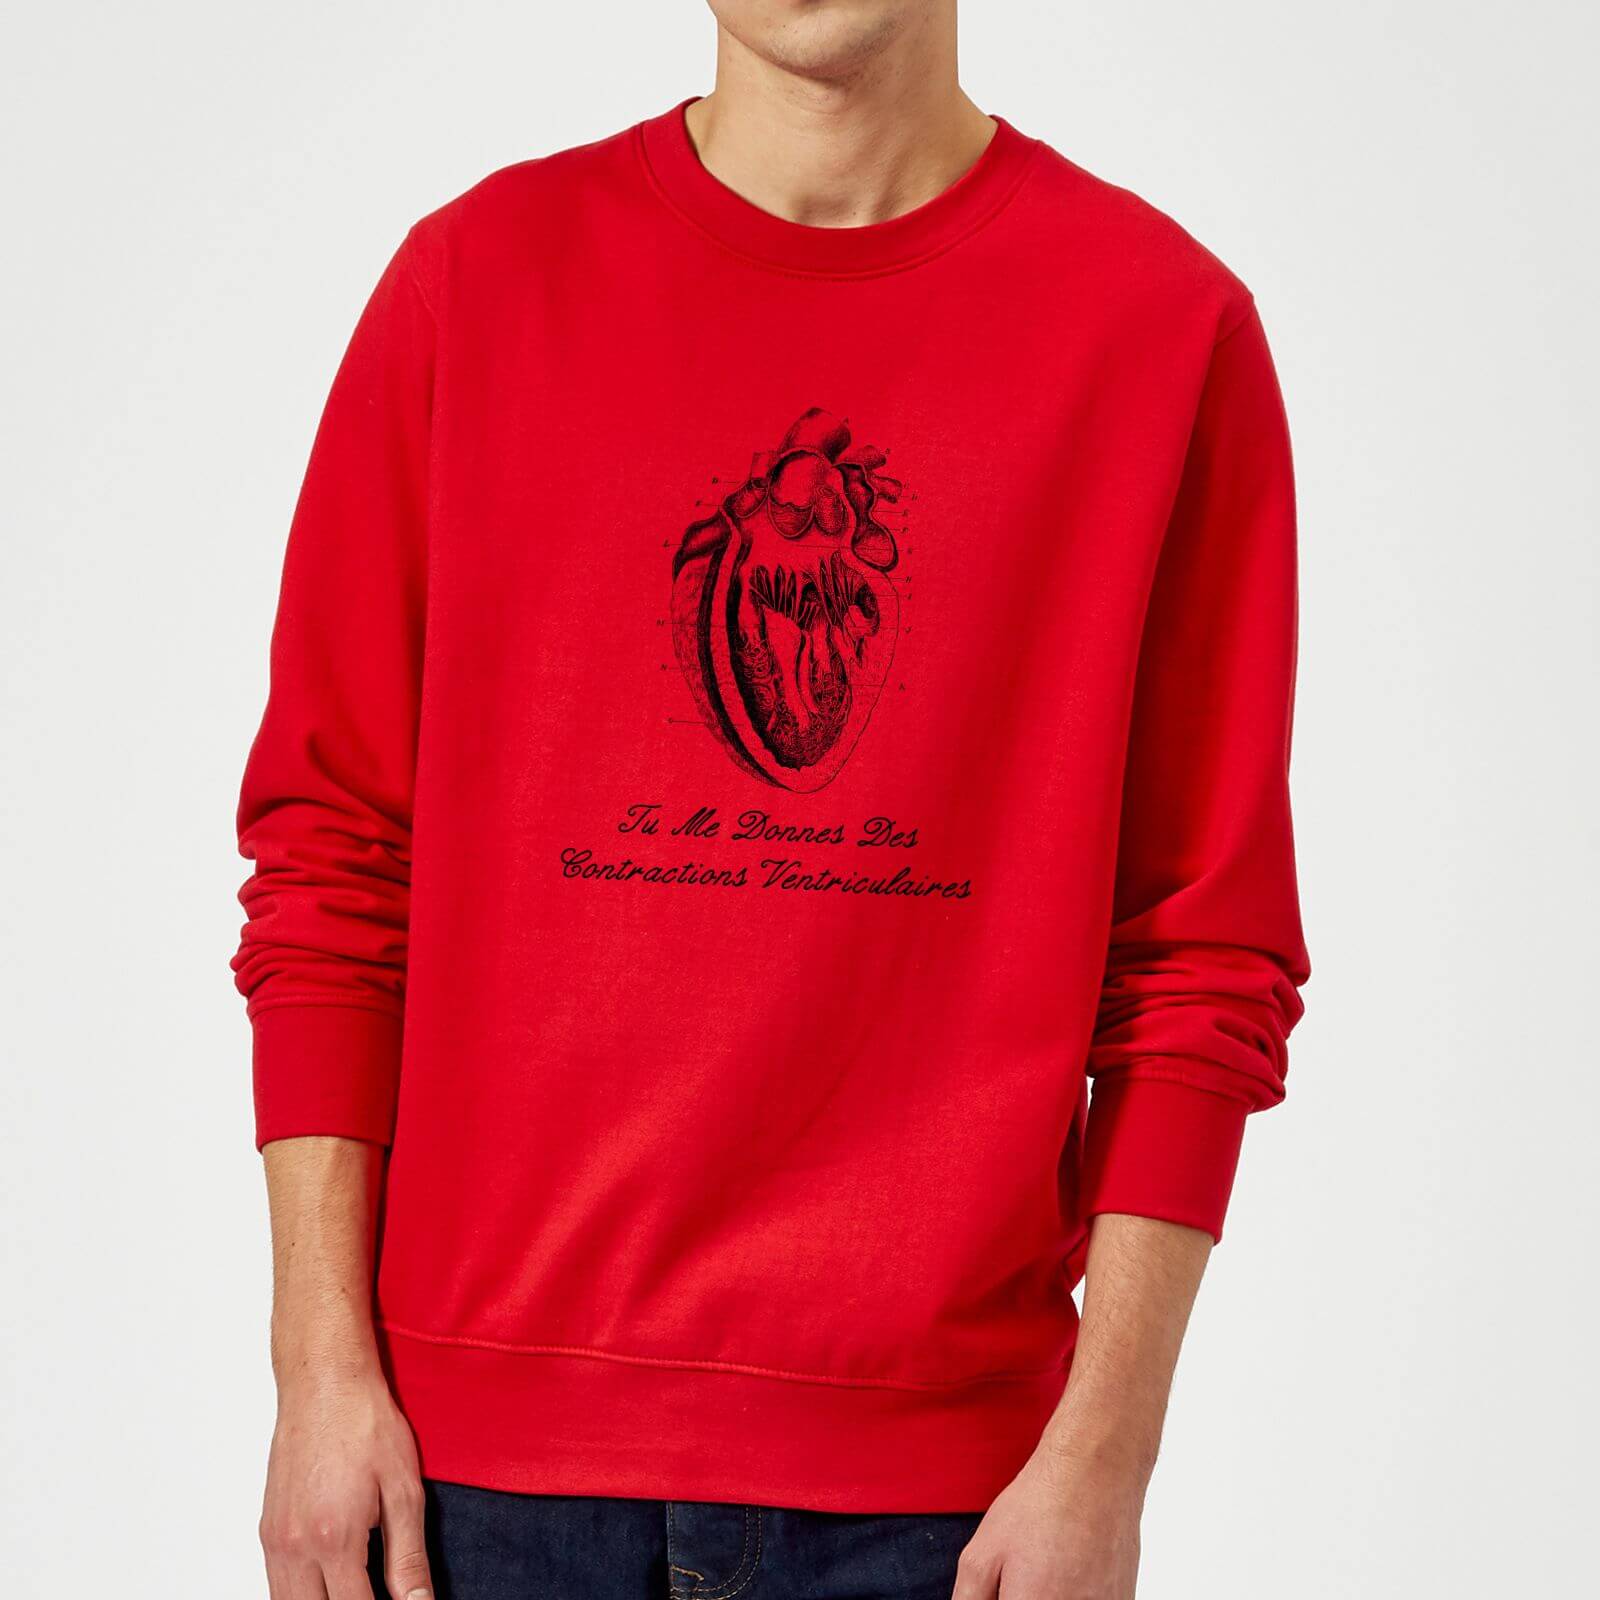 Premature Ventricular Contractions (FR) Sweatshirt - Red - M - Red